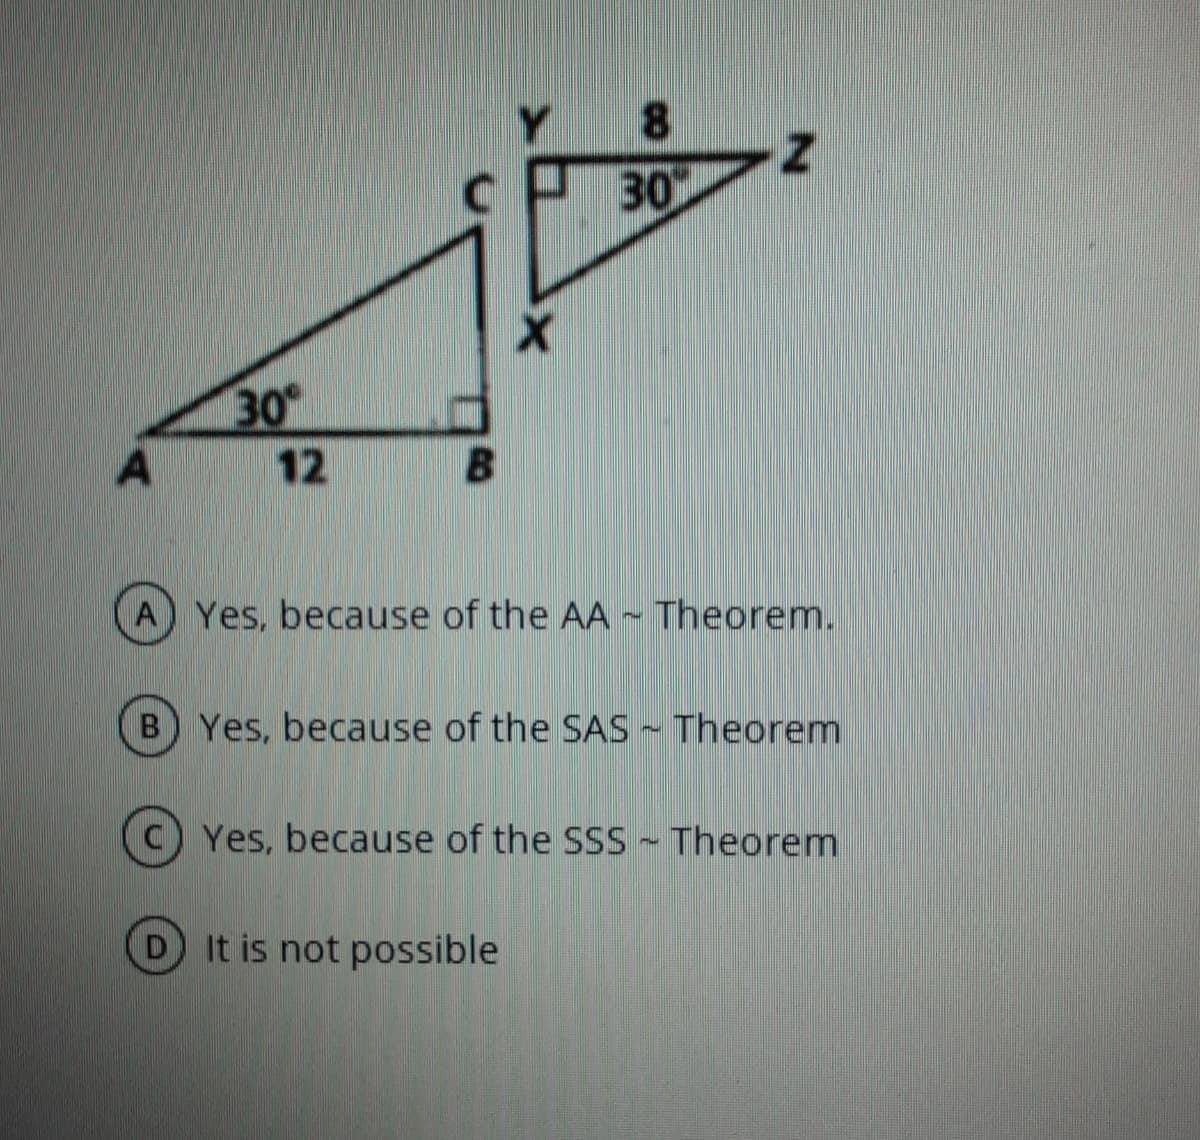 8.
30
30
12
A Yes, because of the AA
Theorem.
B Yes, because of the SAS - Theorem
Yes, because of the SSS Theorem
D It is not possible
